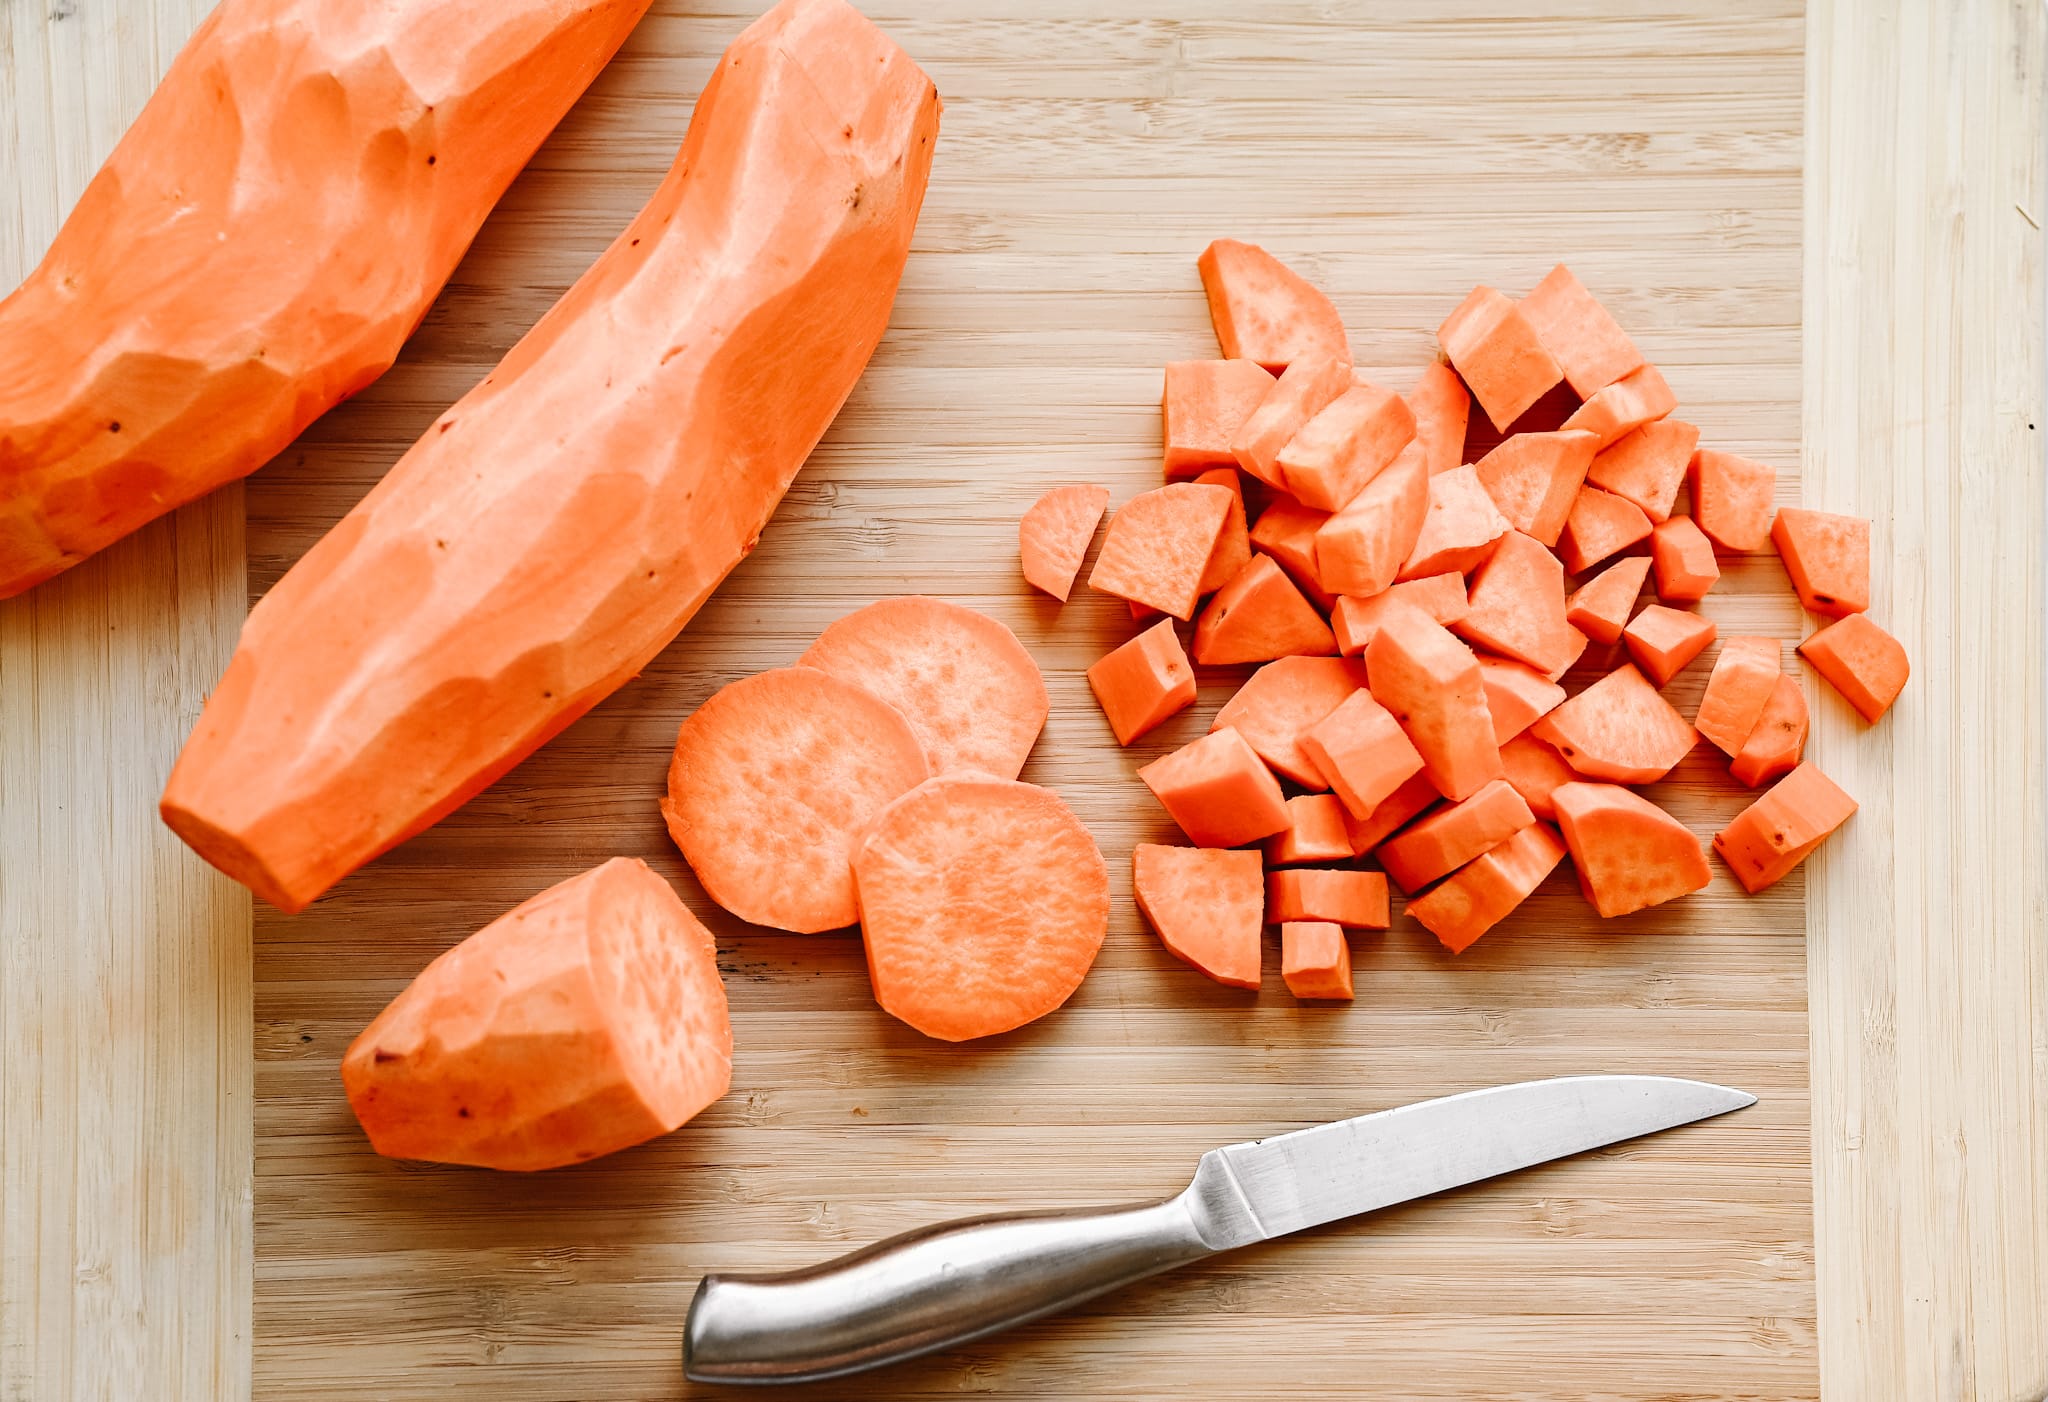 An image of diced and skinned sweet potatoes on a chopping board.